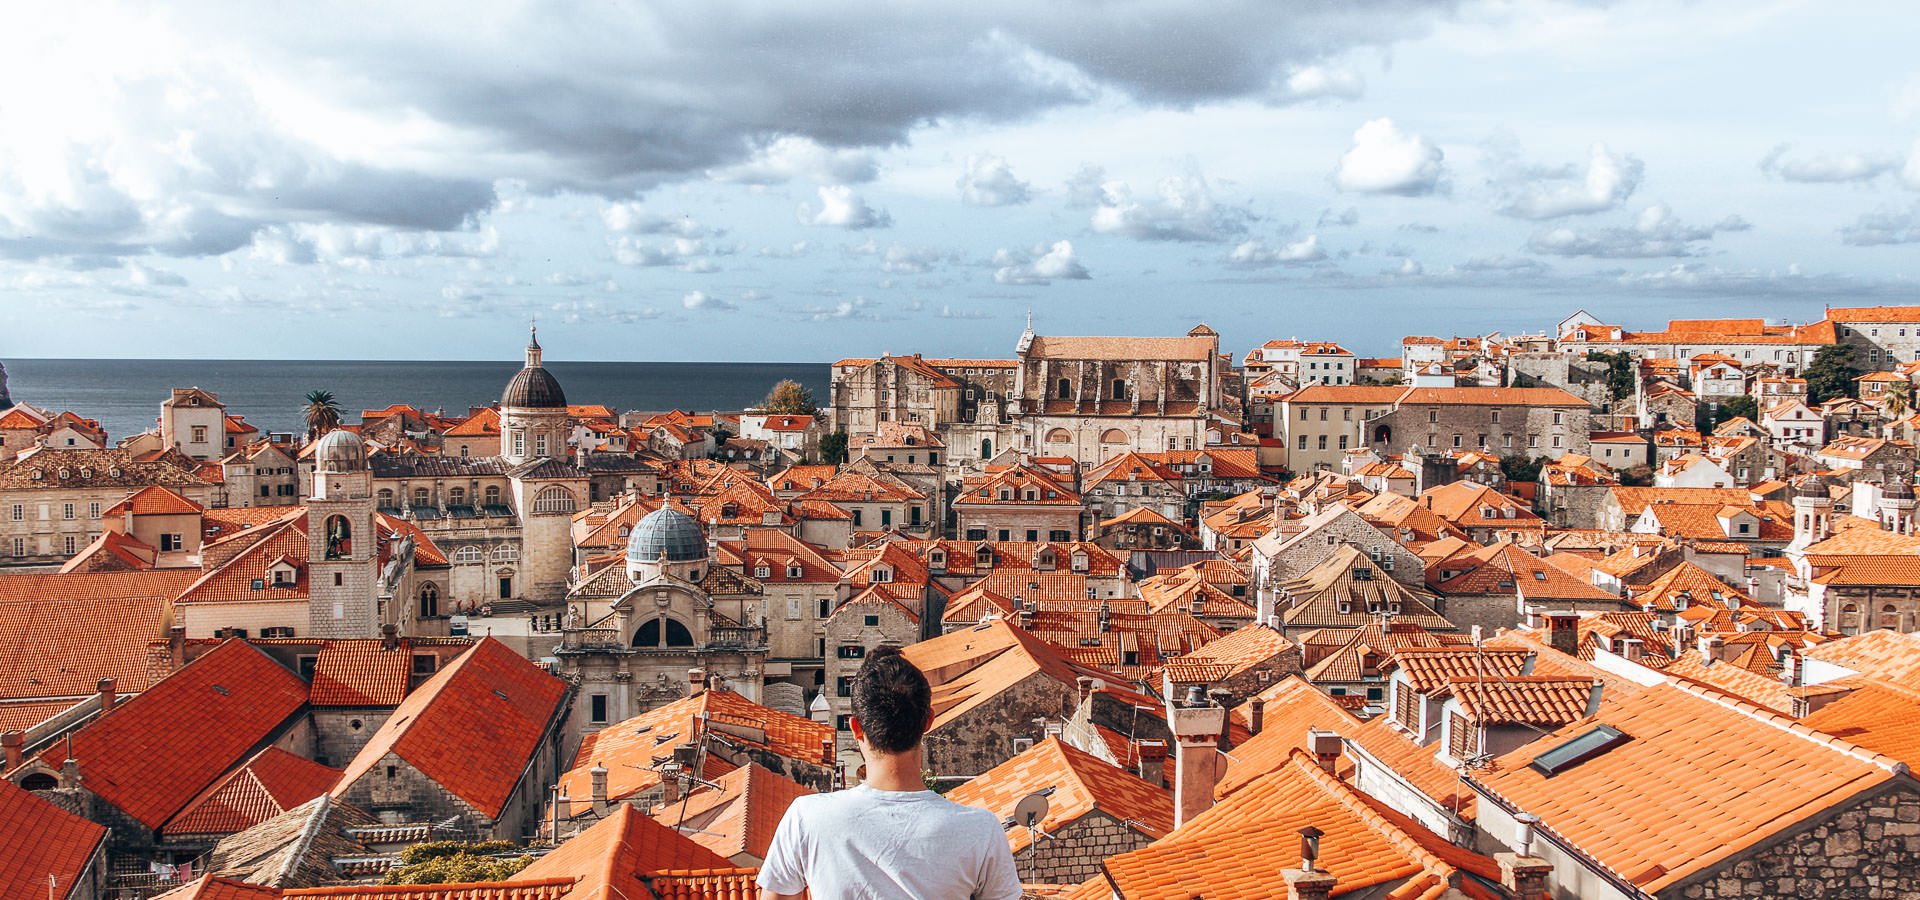 How To Spend 48 Hours In Dubrovnik | 48 hours in dubrovnik 4